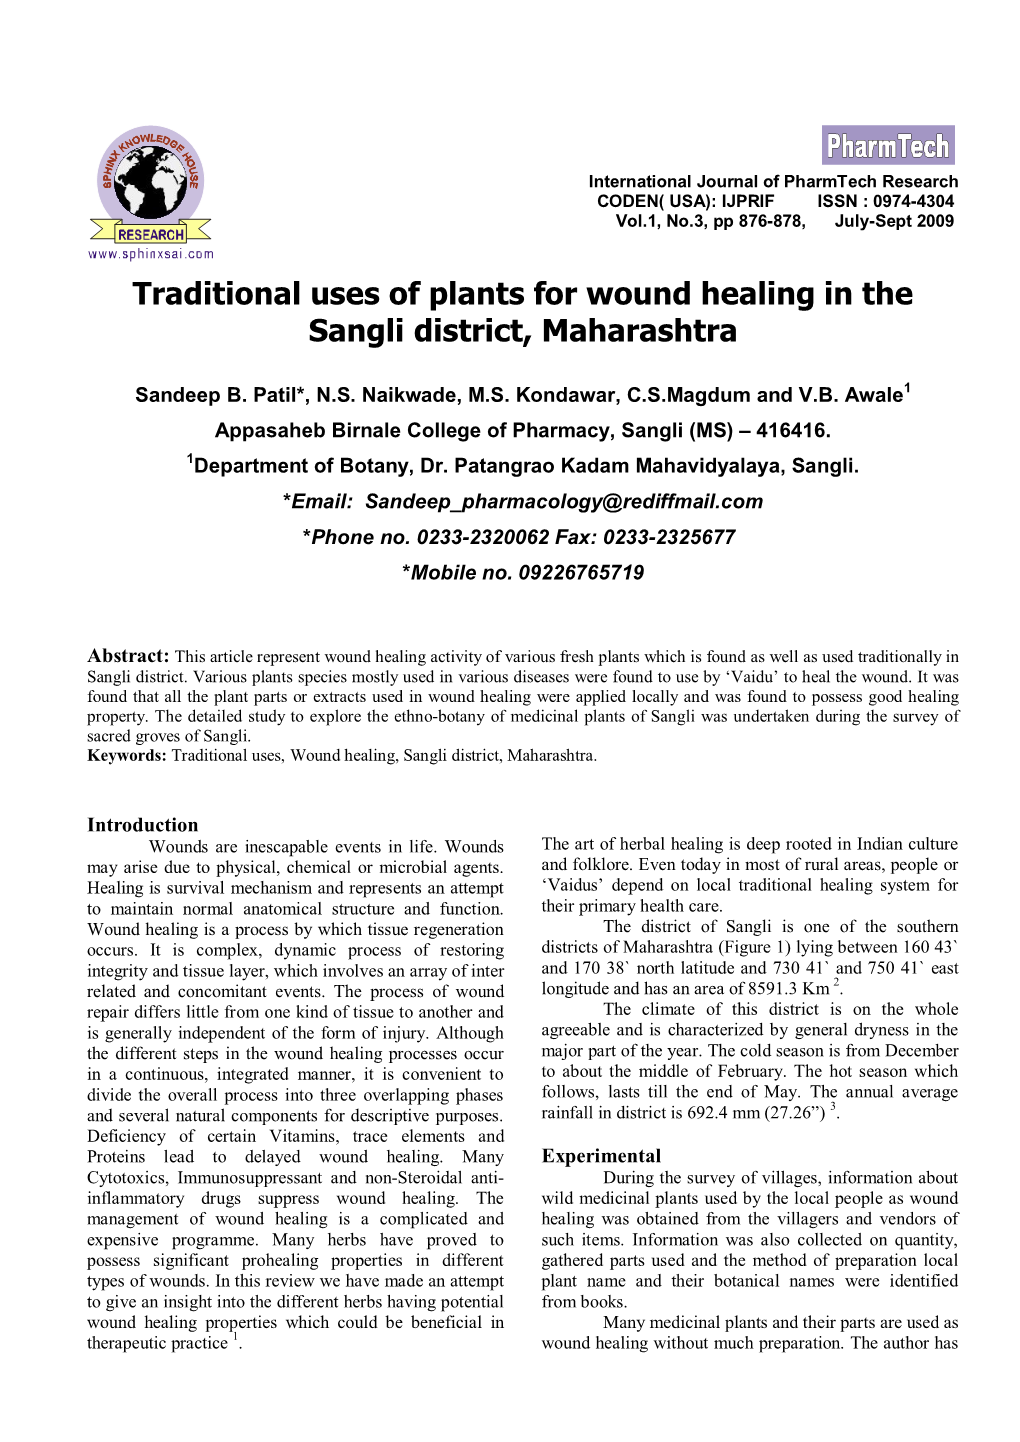 Traditional Uses of Plants for Wound Healing in the Sangli District, Maharashtra